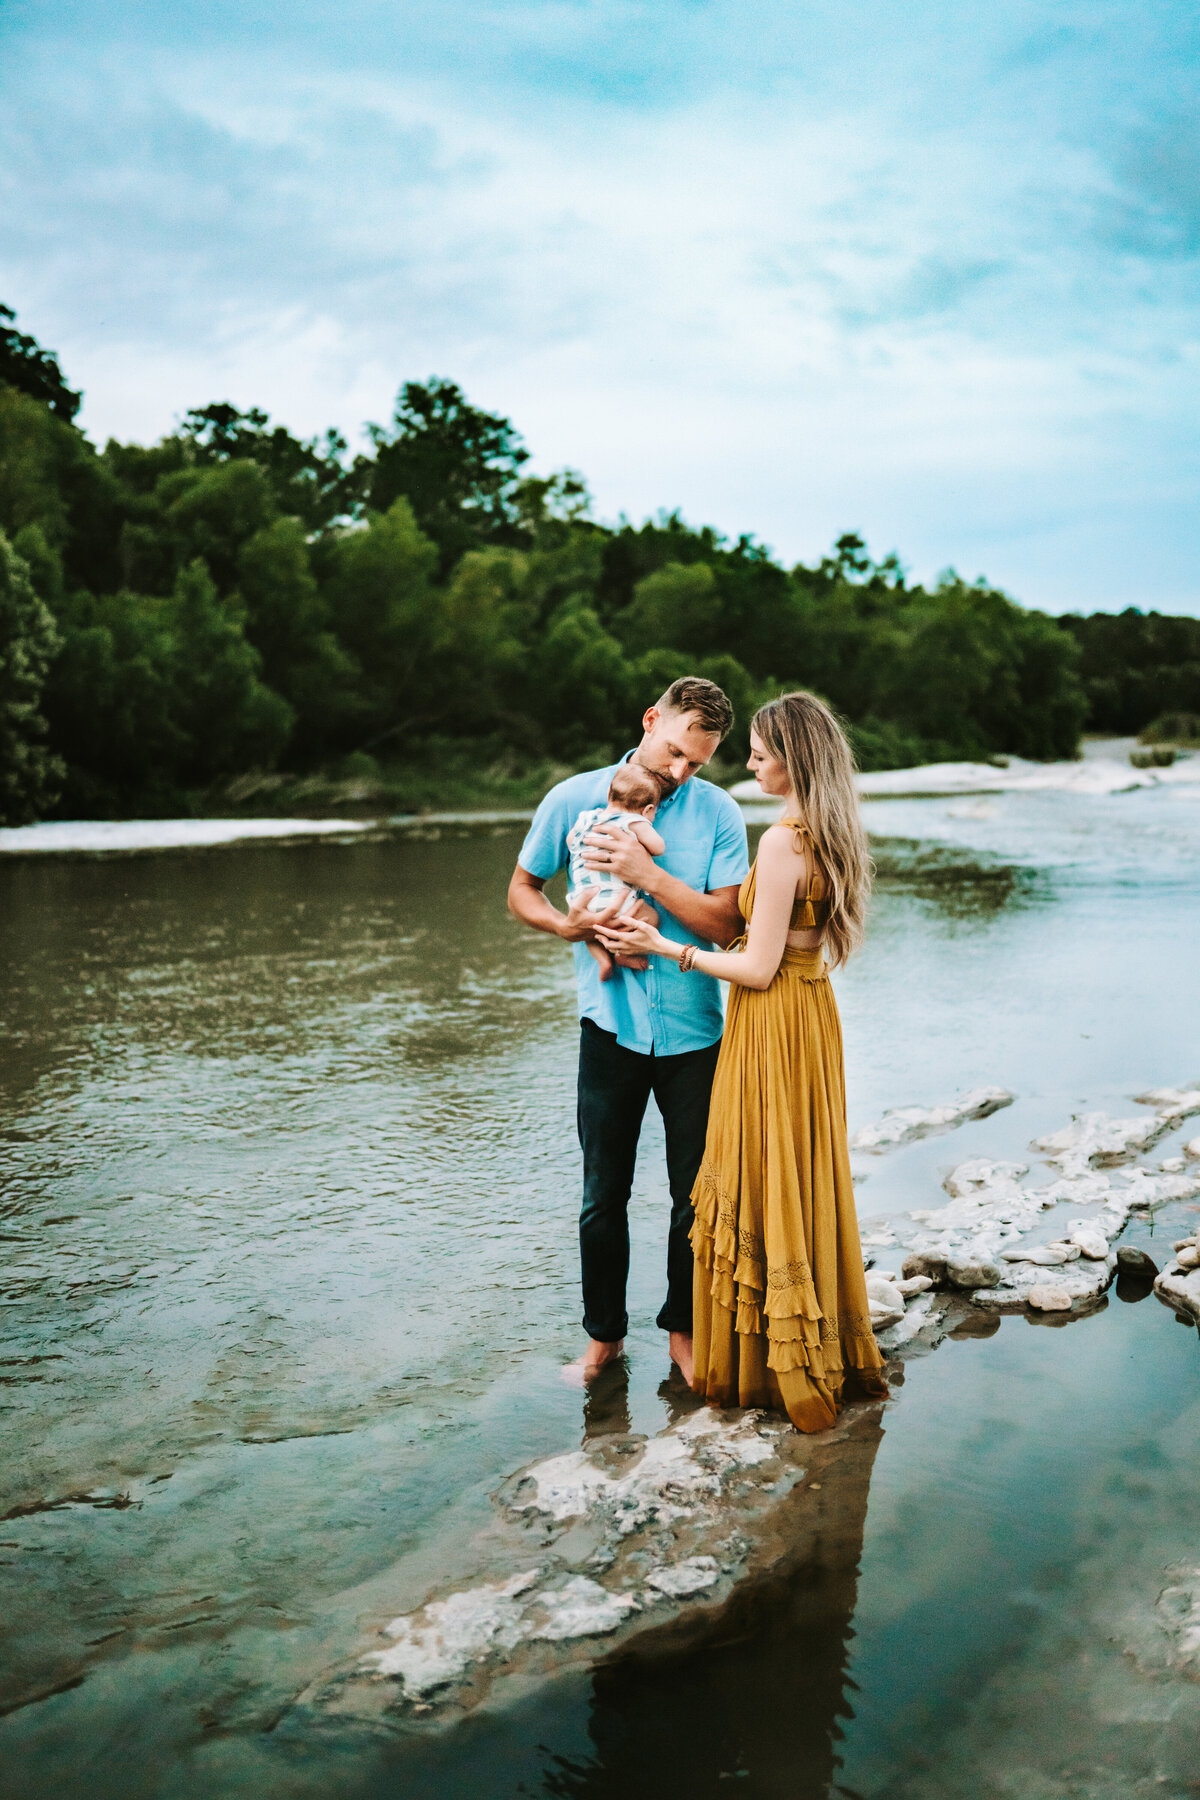 Family Photographer, mom and day stand near a still river admiring their new baby